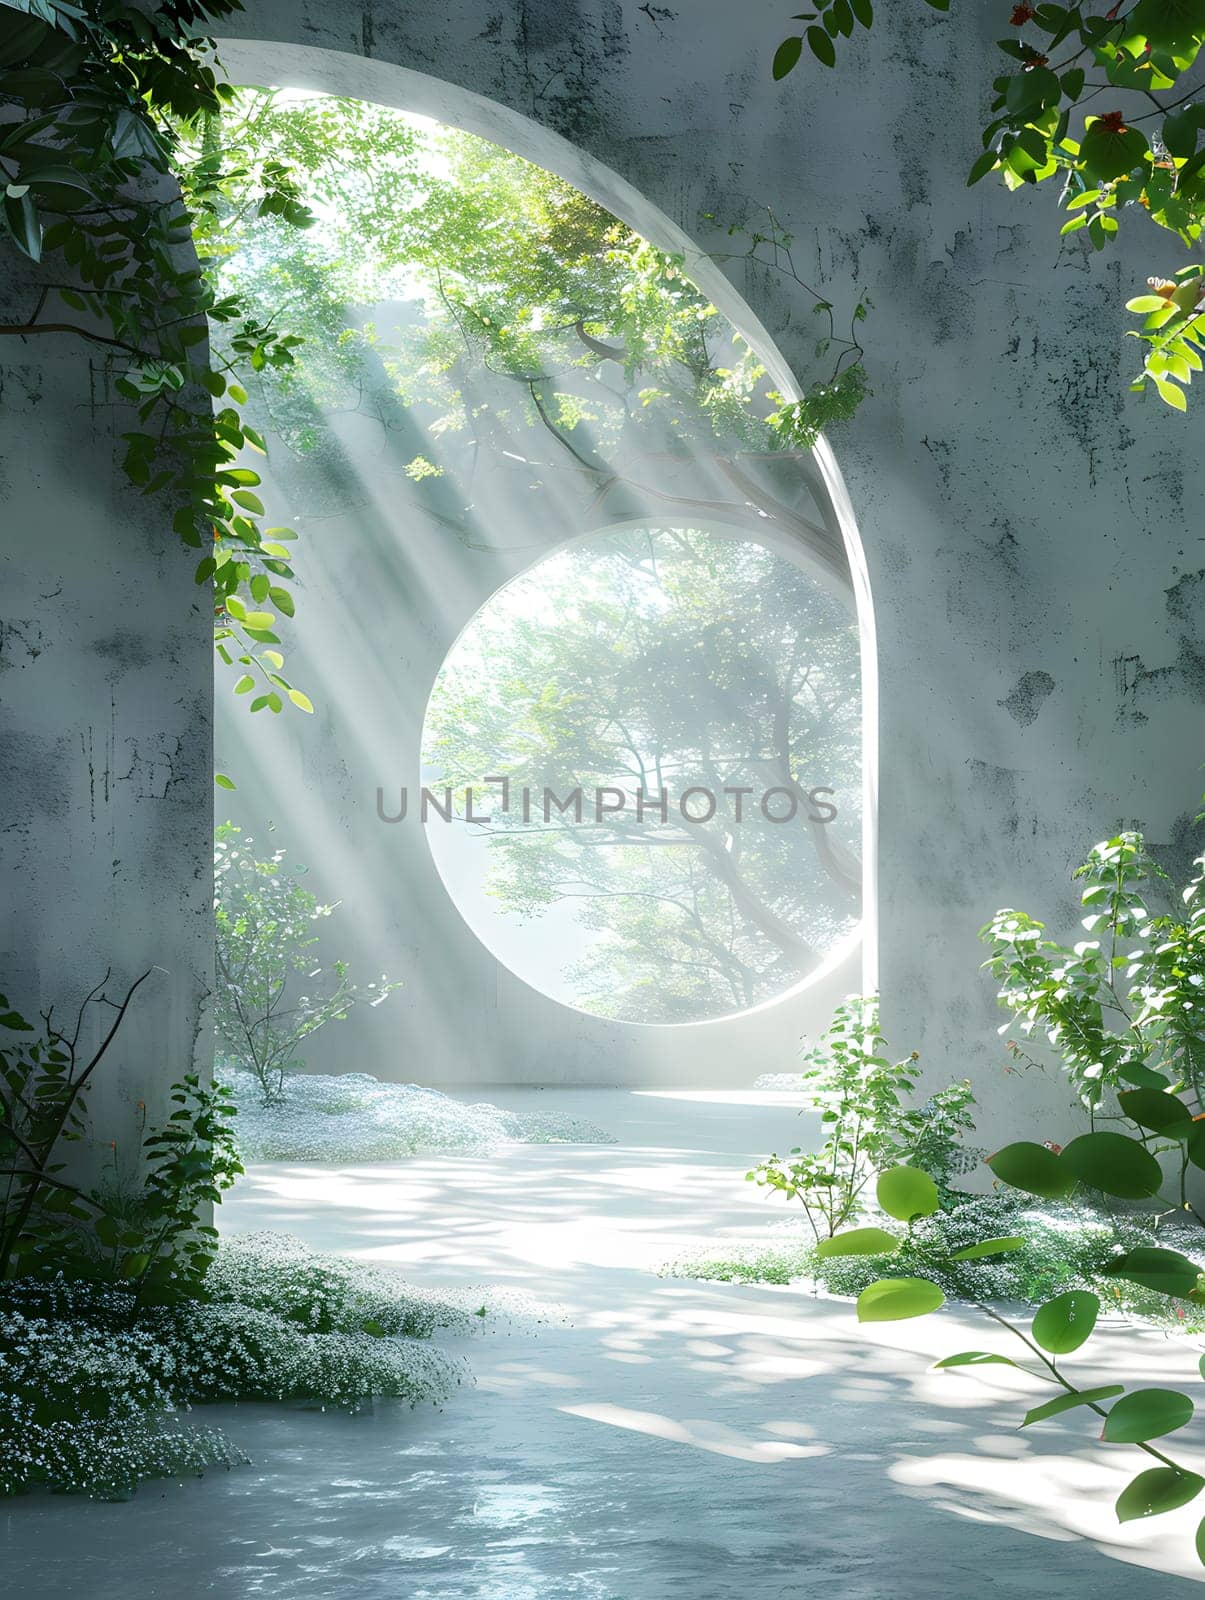 The sunlight filters through a circular window in the wall, illuminating a variety of terrestrial plants like grass, woody plants, and forests in the natural landscape